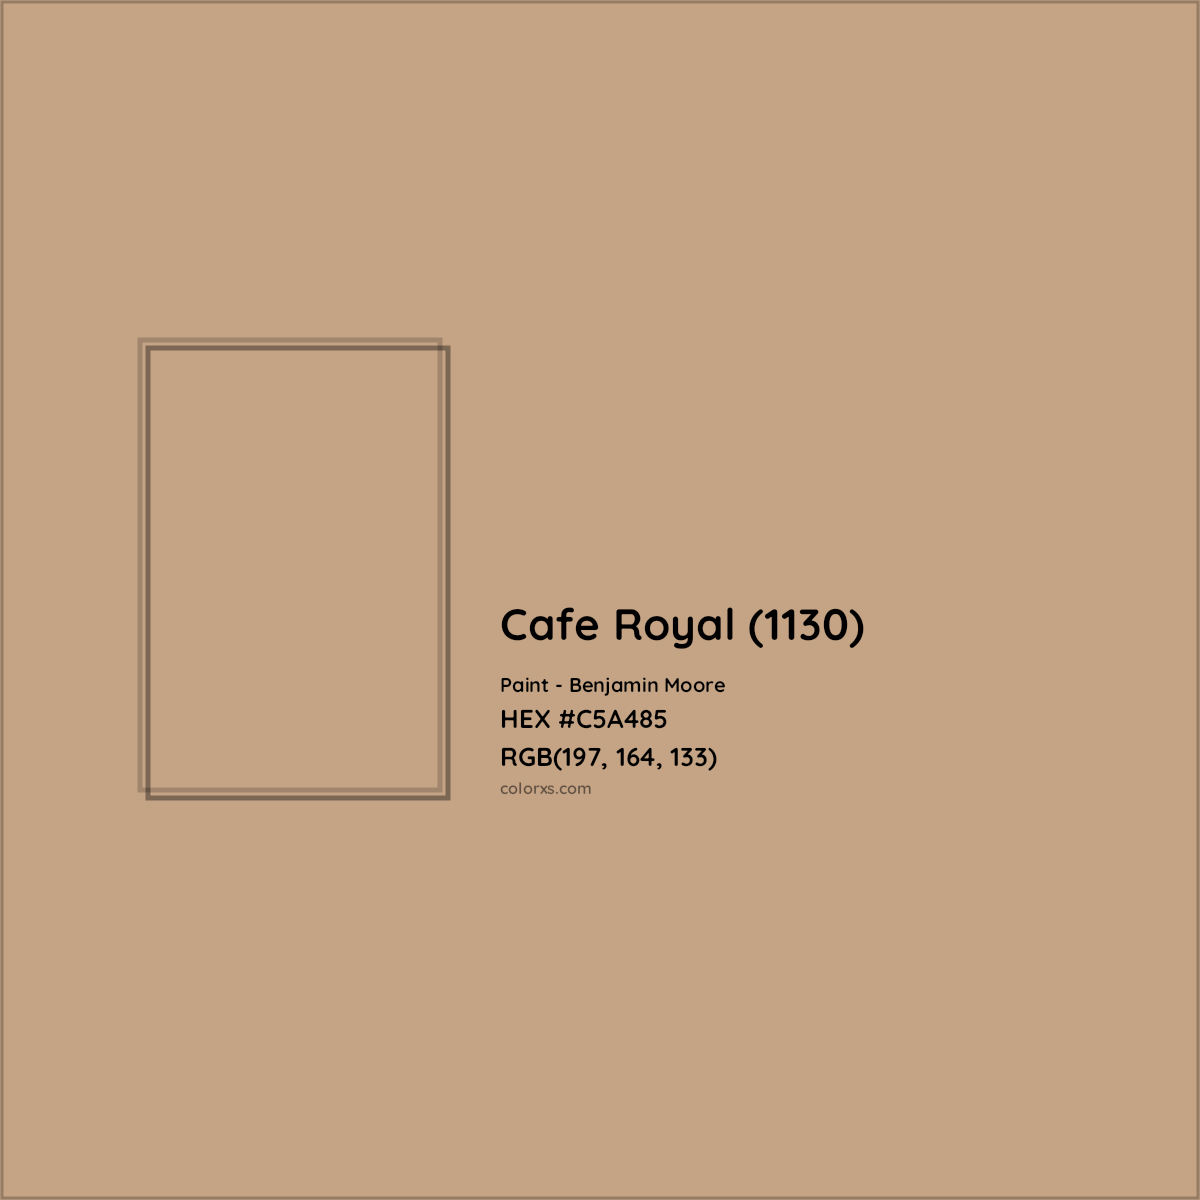 HEX #C5A485 Cafe Royal (1130) Paint Benjamin Moore - Color Code